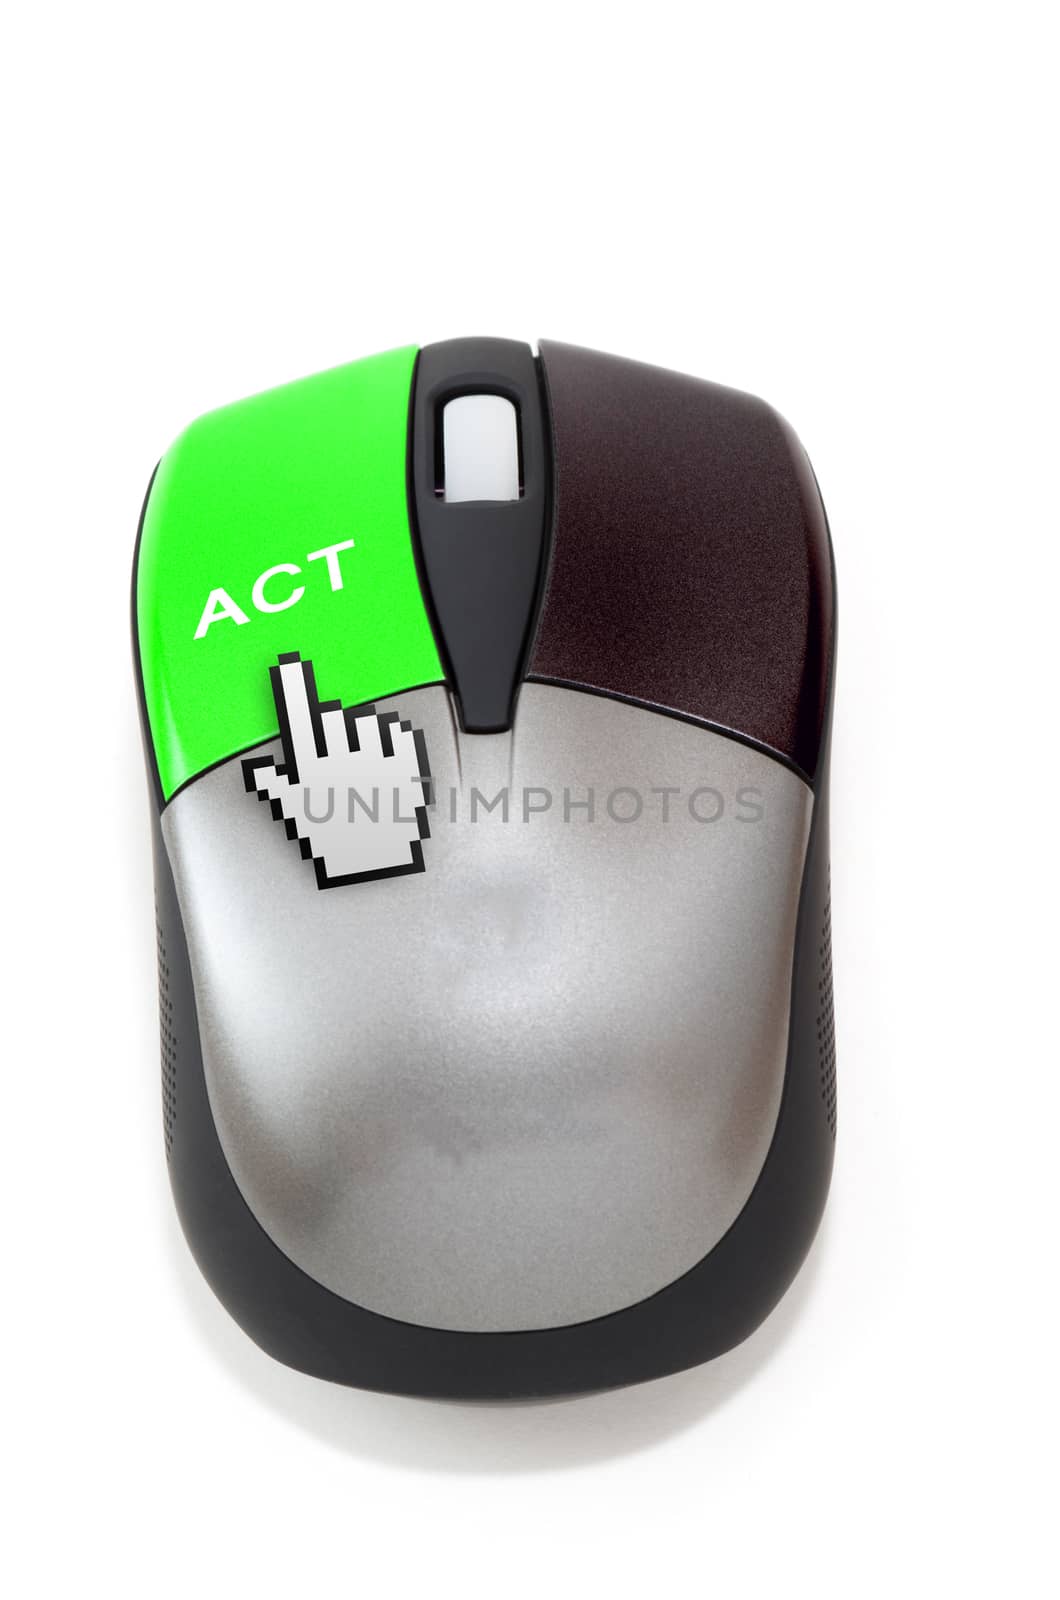 Hand cursor clicking on act button of a mouse by daoleduc